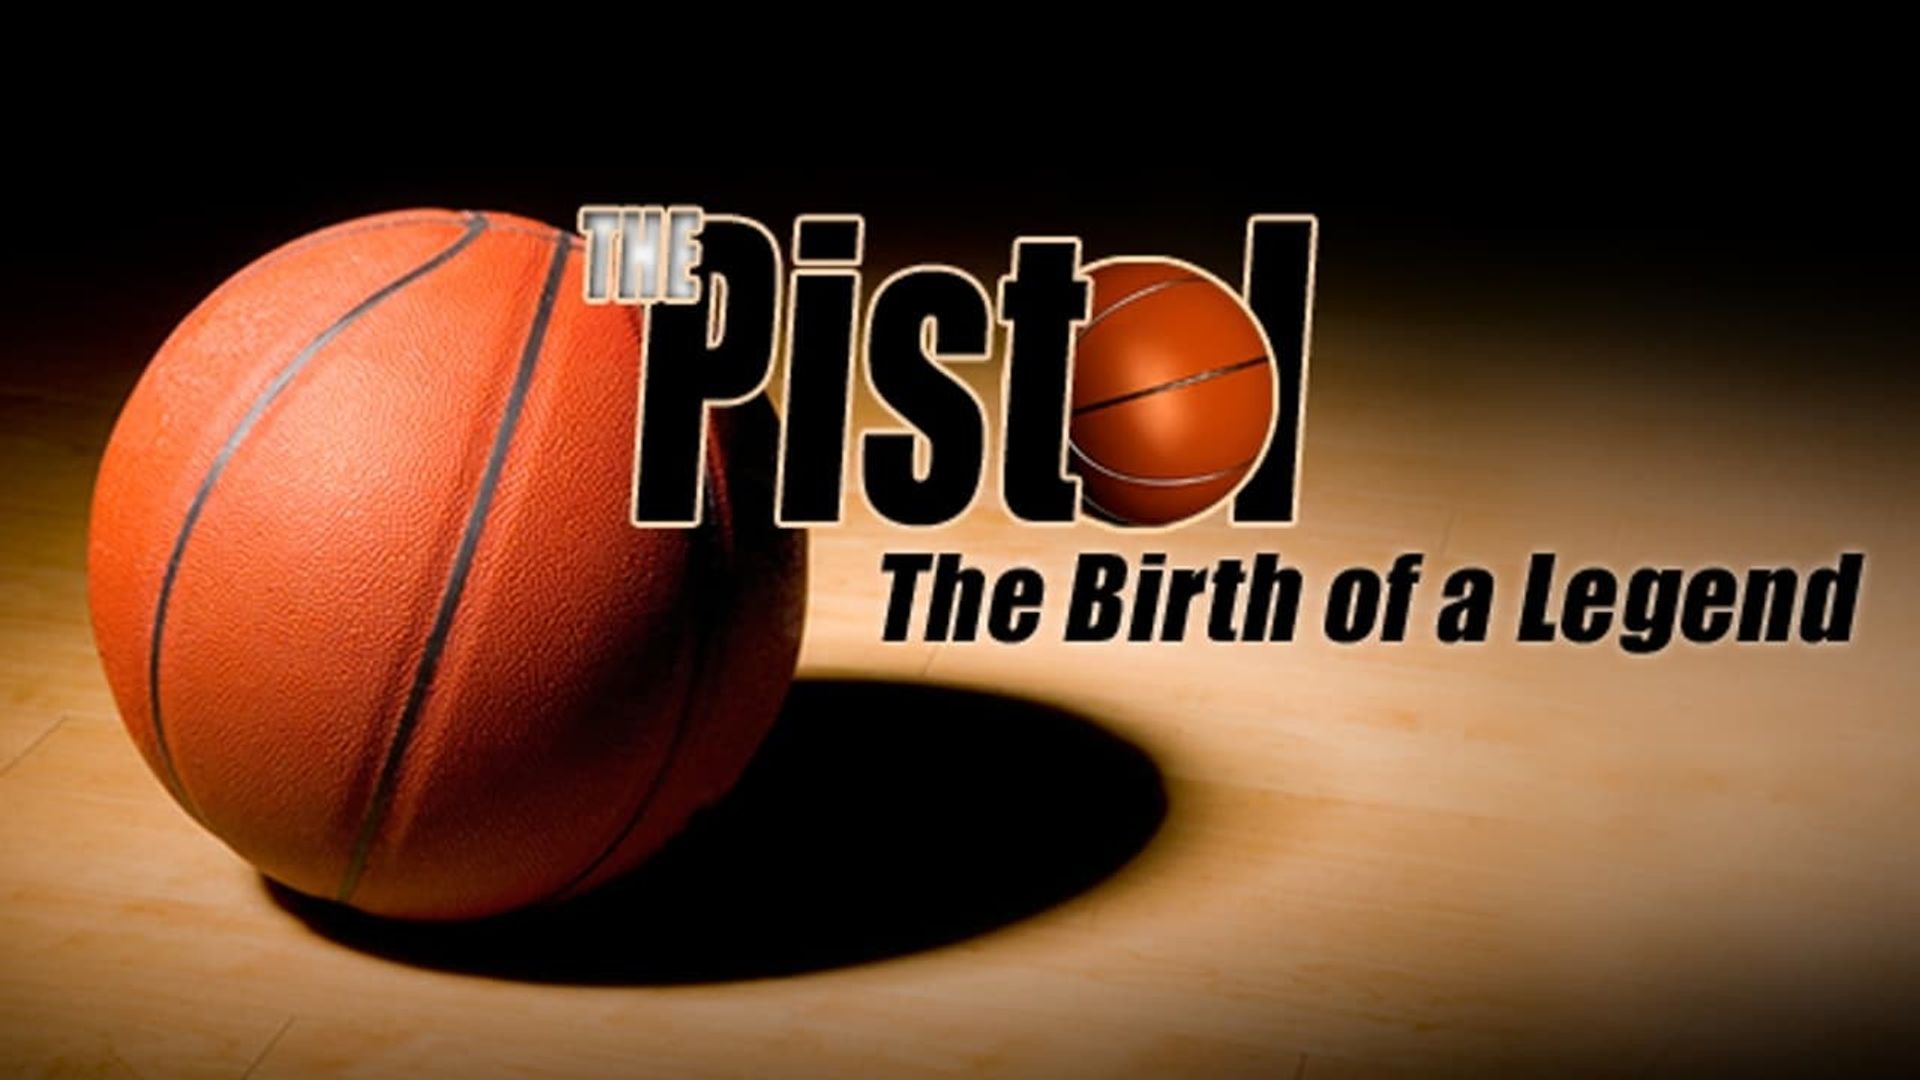 The Pistol: The Birth of a Legend background